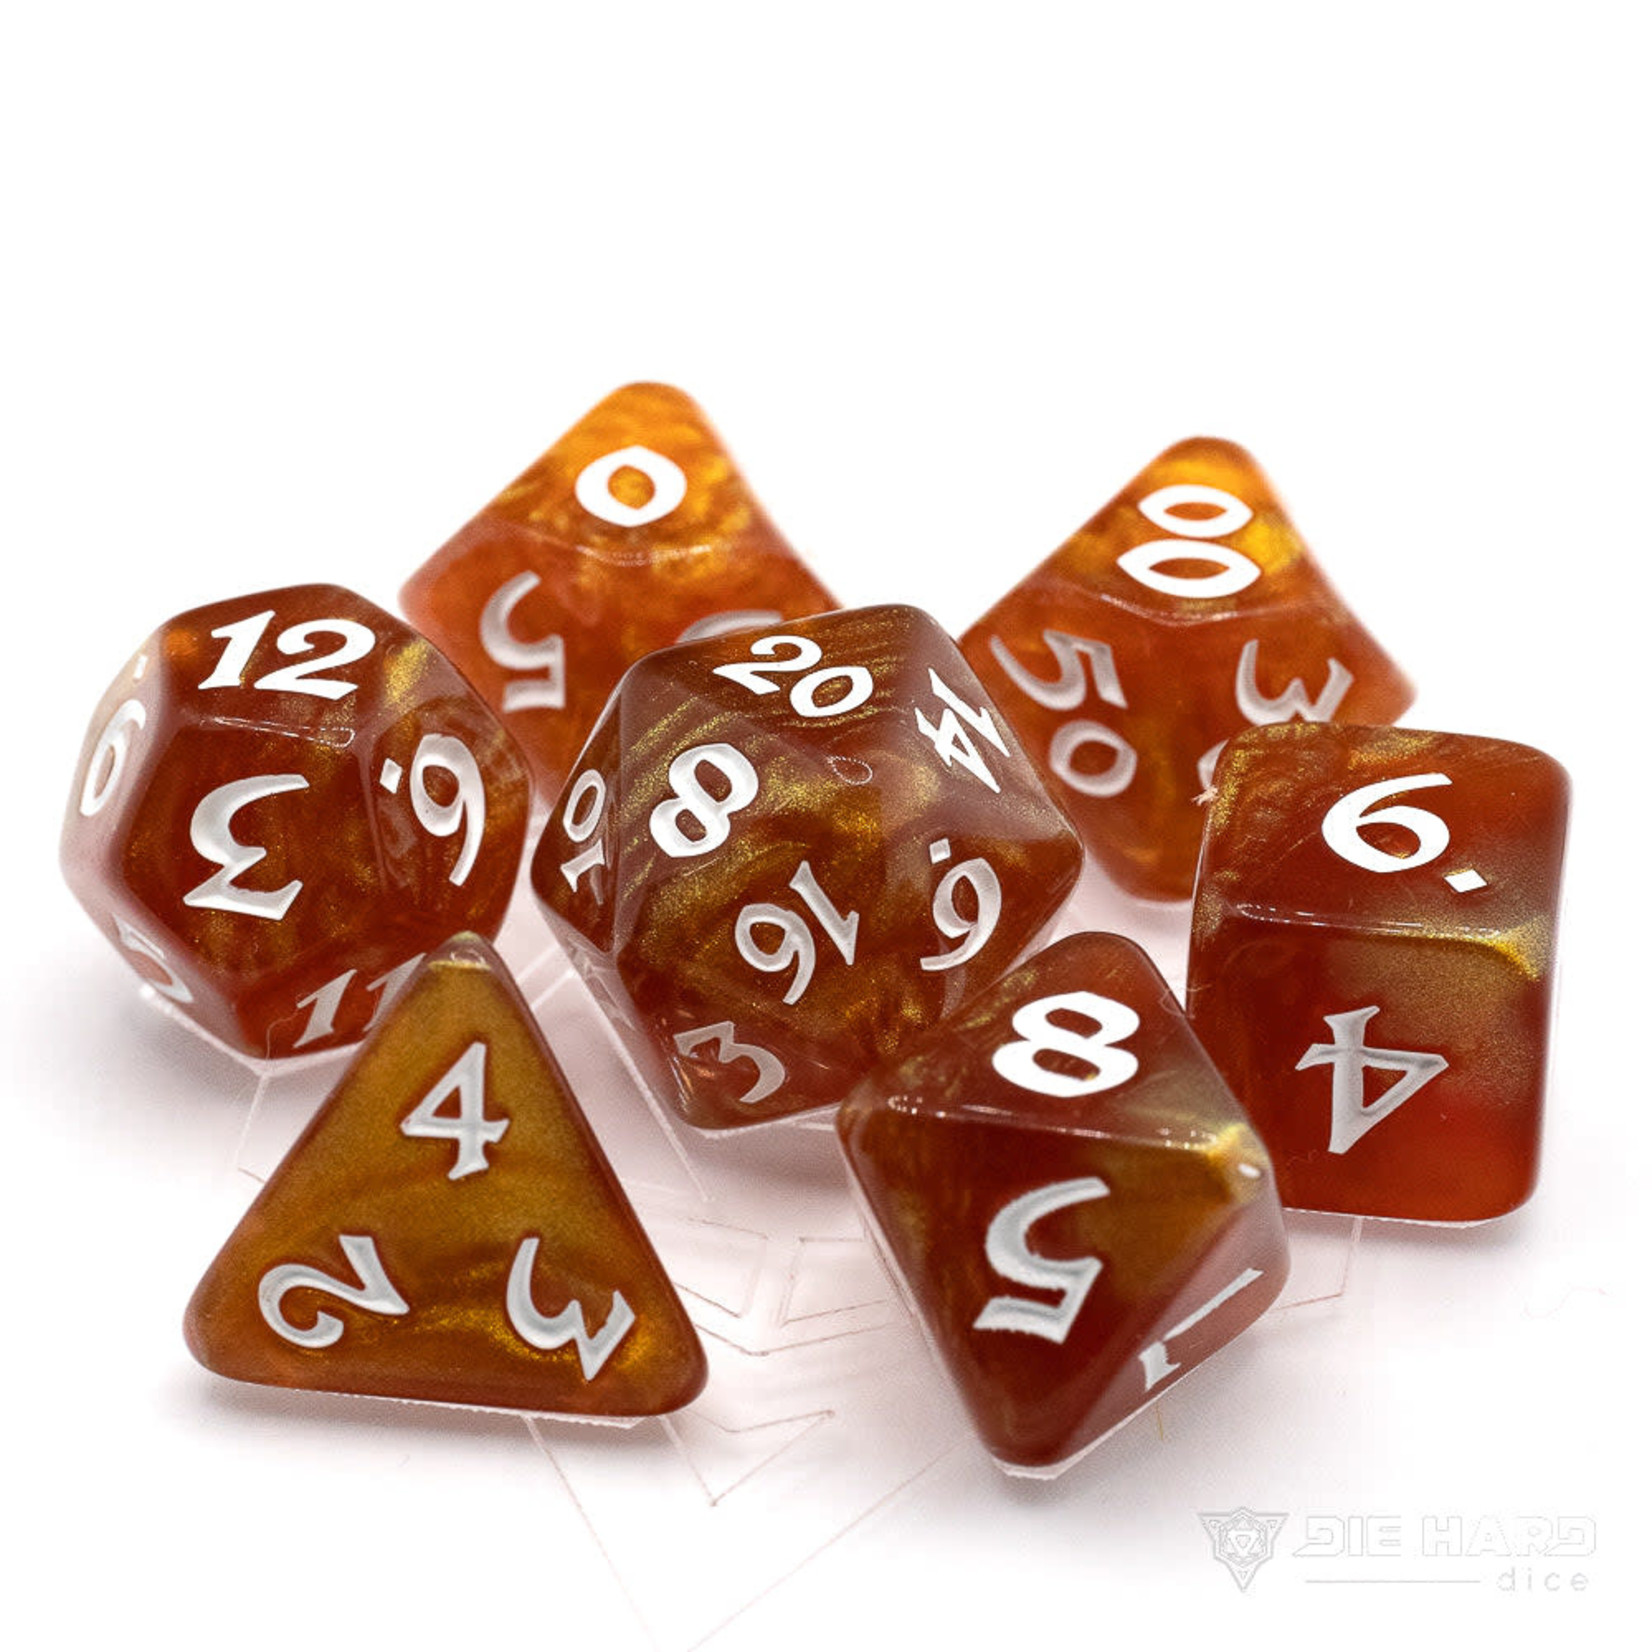 Die Hard Dice 7 Piece RPG Set - Elessia - Bloodfire with White